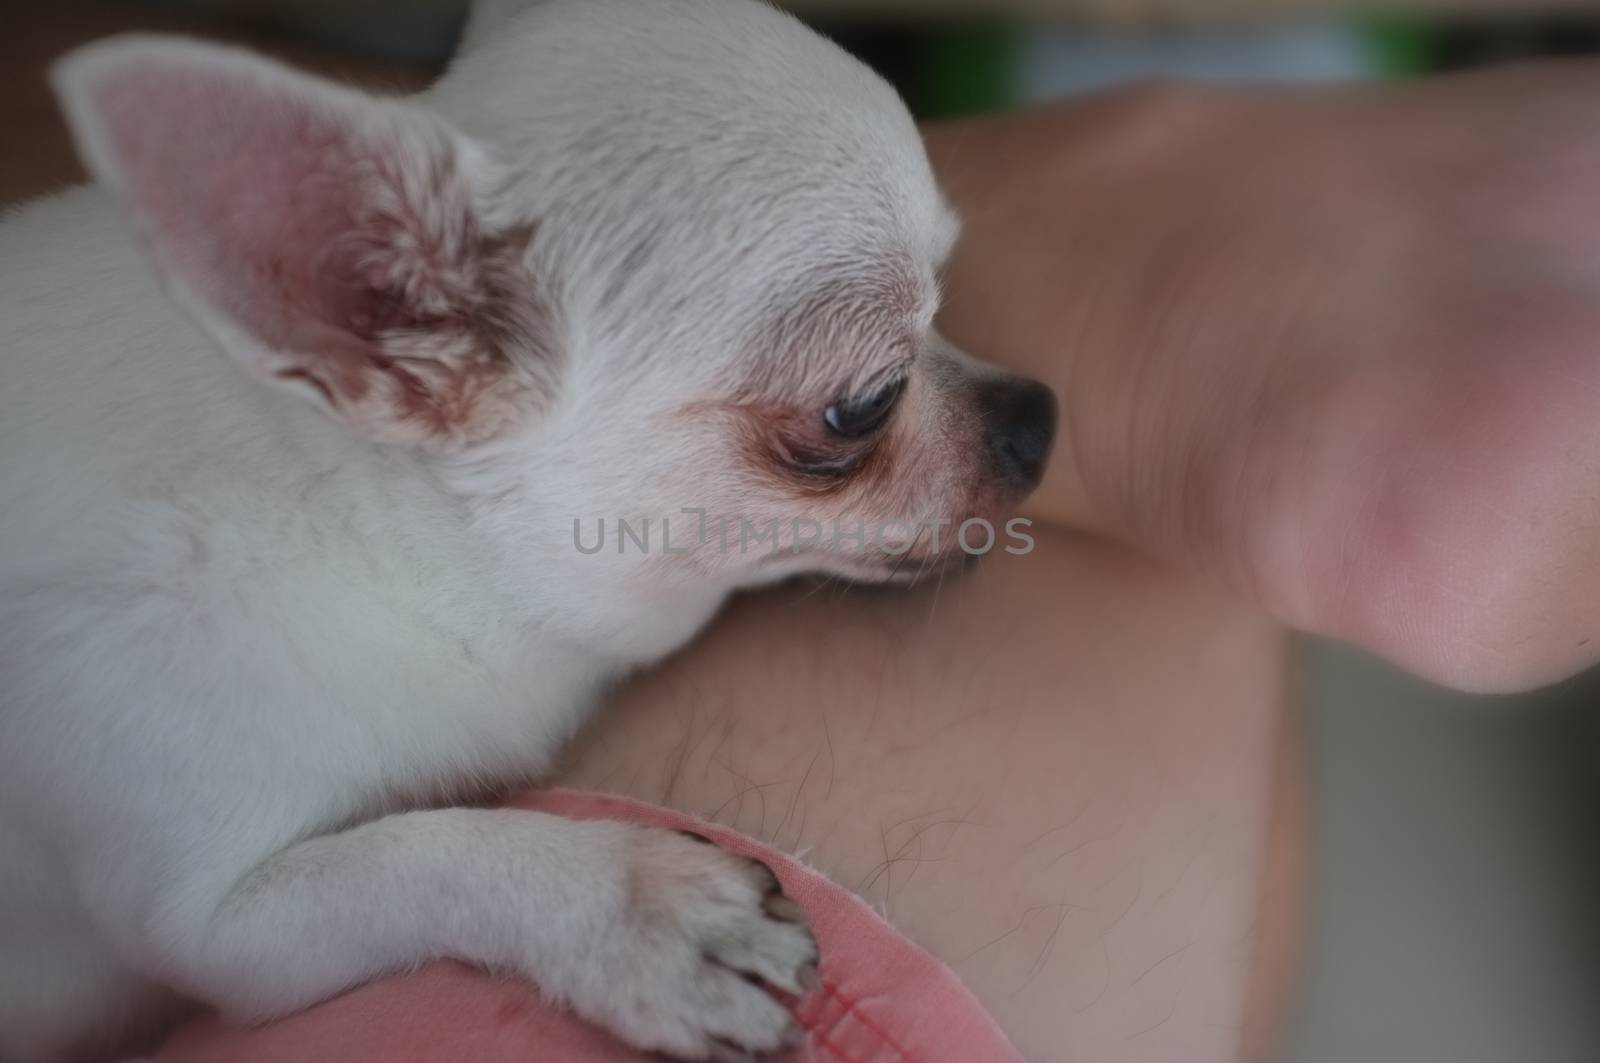 Chihua-hua is resting for man owner petting his pet, Close up. Concept Dog lover